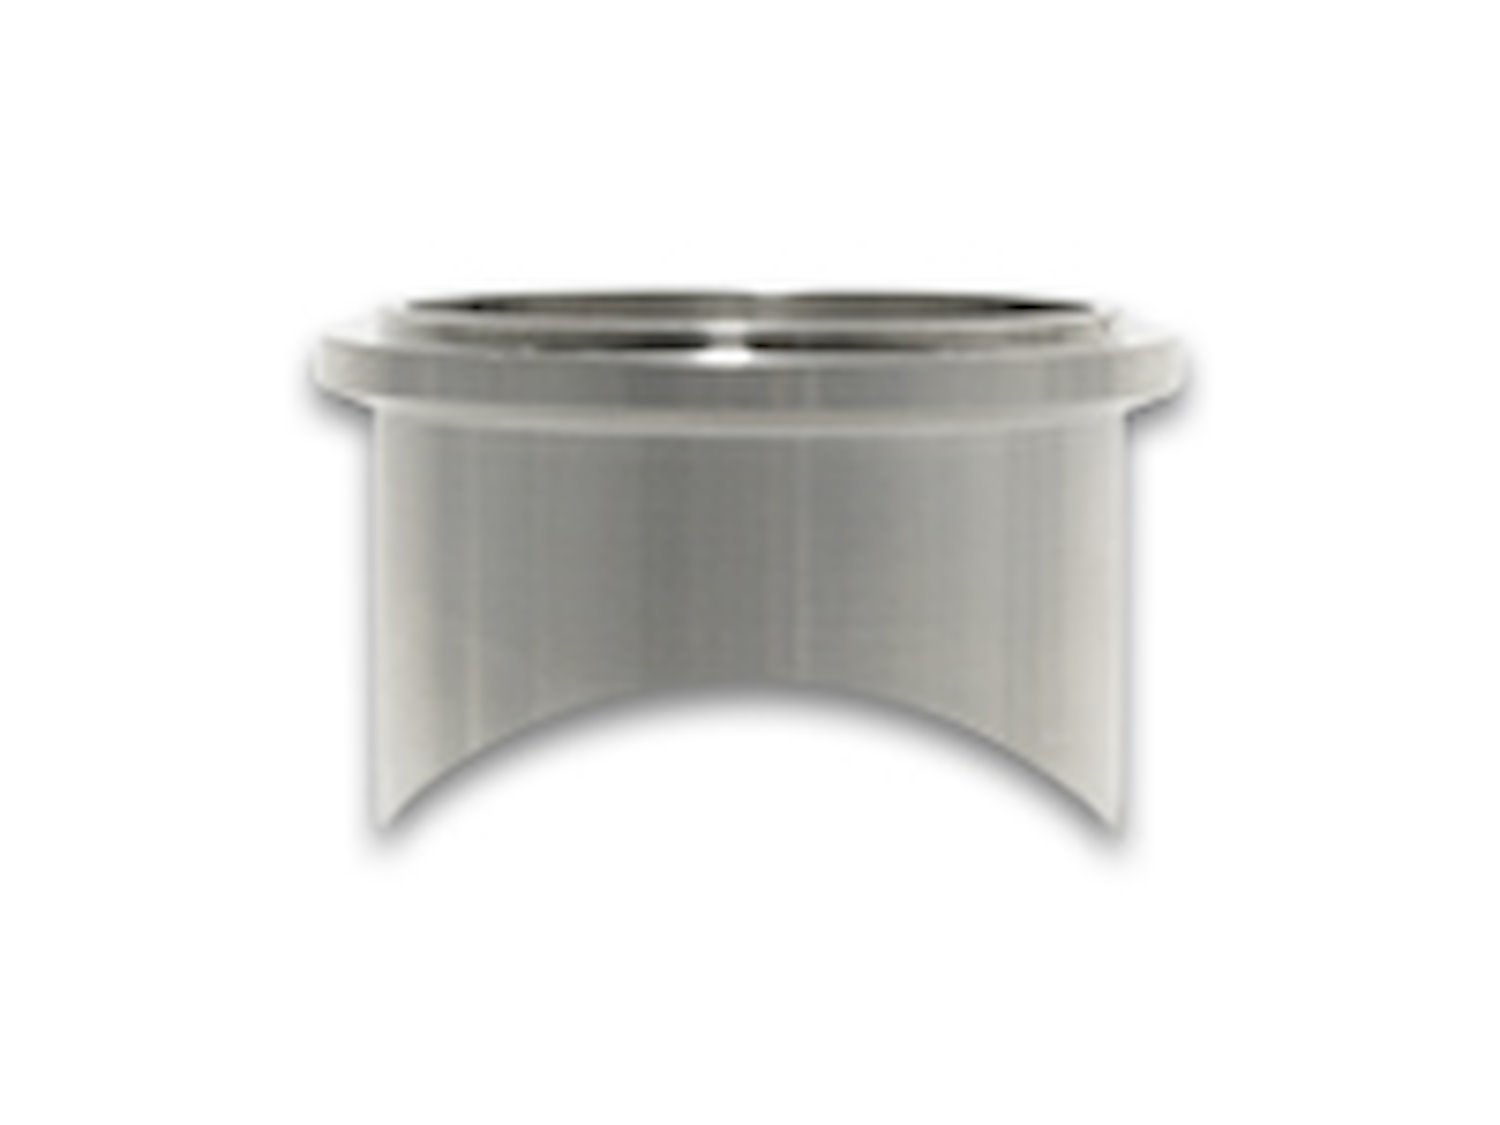 Tial Blow-Off Valve Weld Flange - Stainless Steel